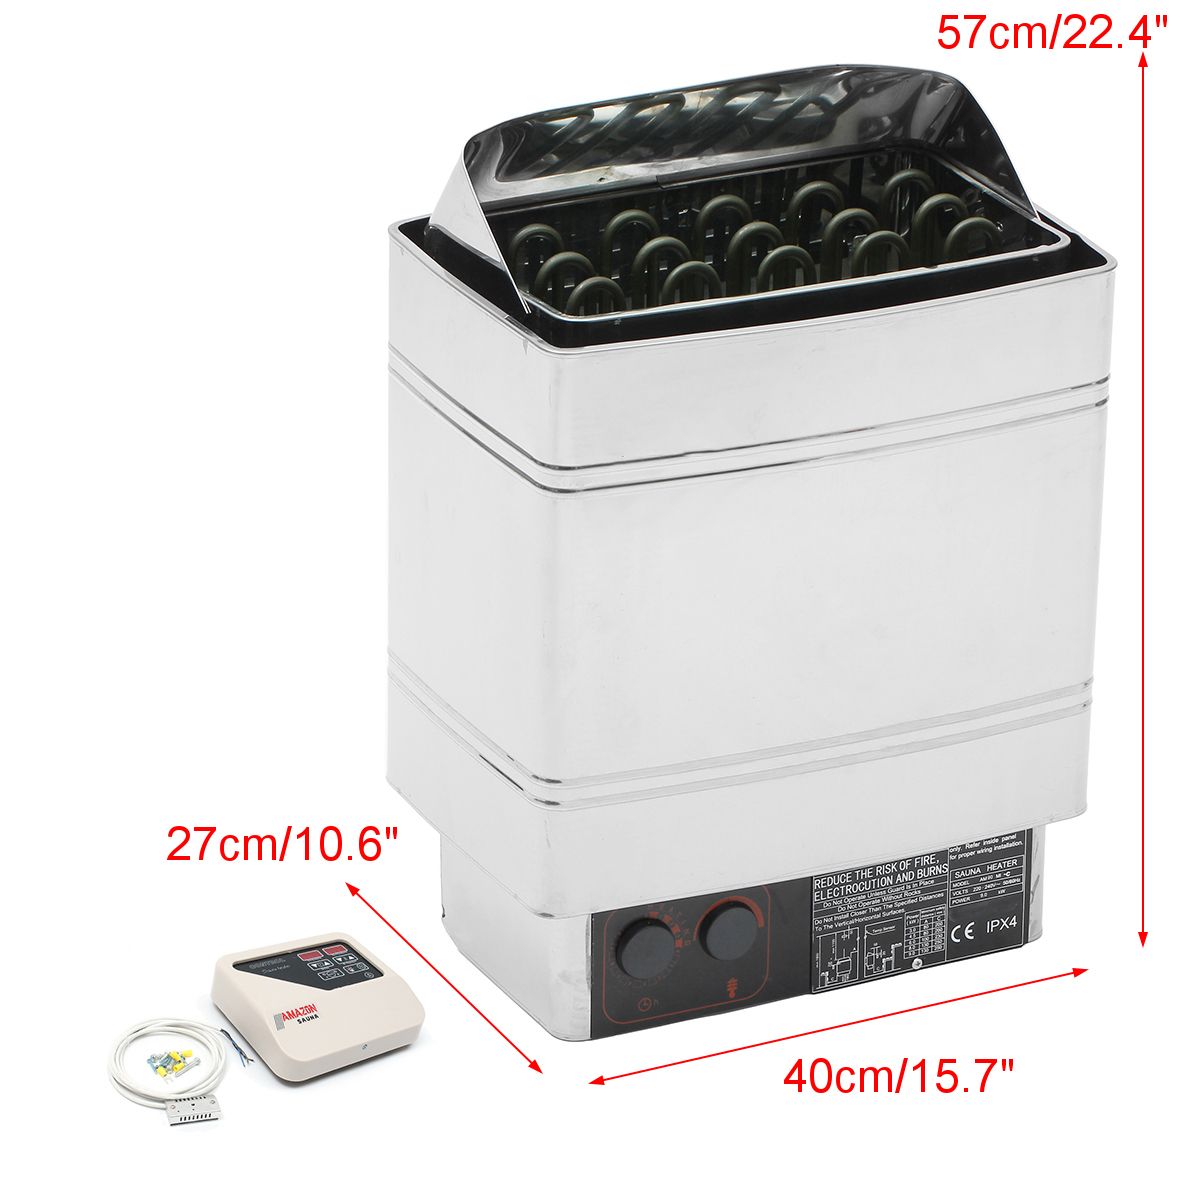 220V-Sauna-Spa-Heater-Electric-Stove-Wet-amp-Dry-Stainless-Steel-External-Control-Device-Bath-Shower-1330349